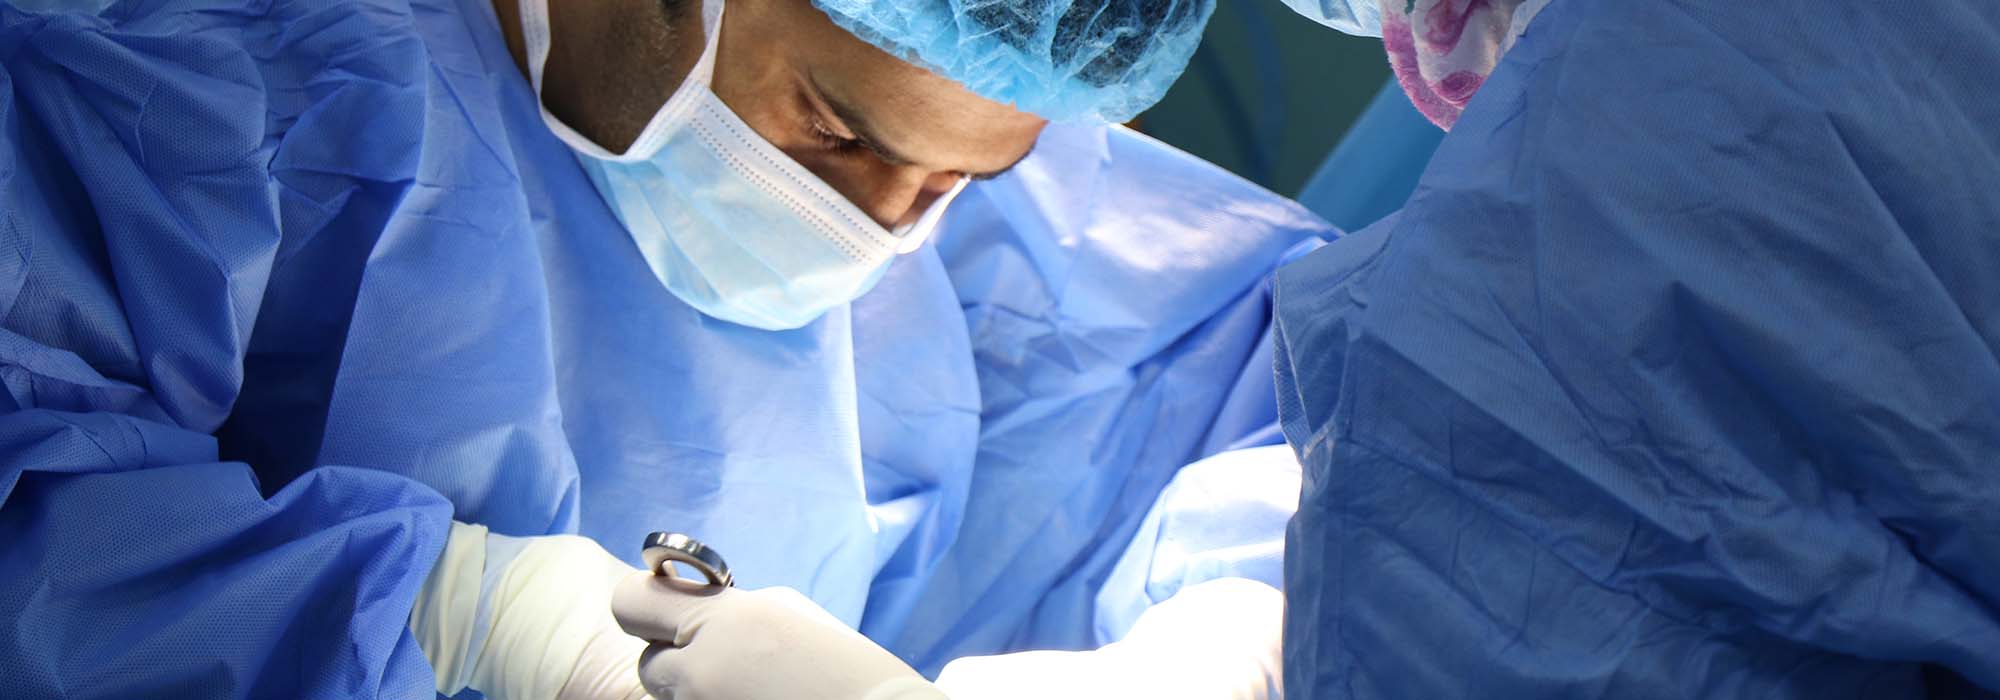 surgeons during an operation